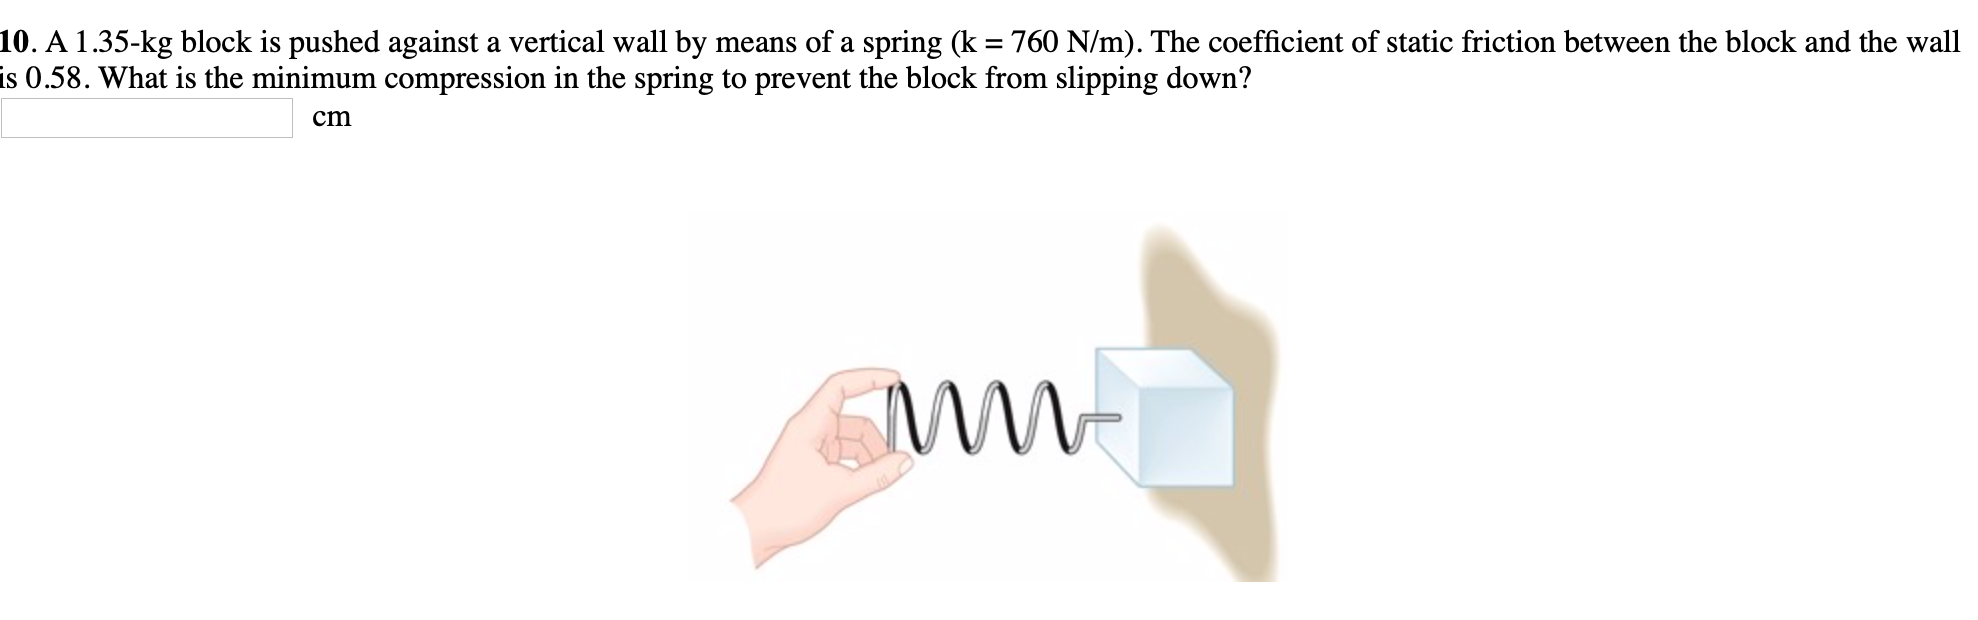 10. A 1.35-kg block is pushed against a vertical wall by means of a spring (k = 760 N/m). The coefficient of static friction between the block and the wall
is 0.58. What is the minimum compression in the spring to prevent the block from slipping down?
%3D
ст
